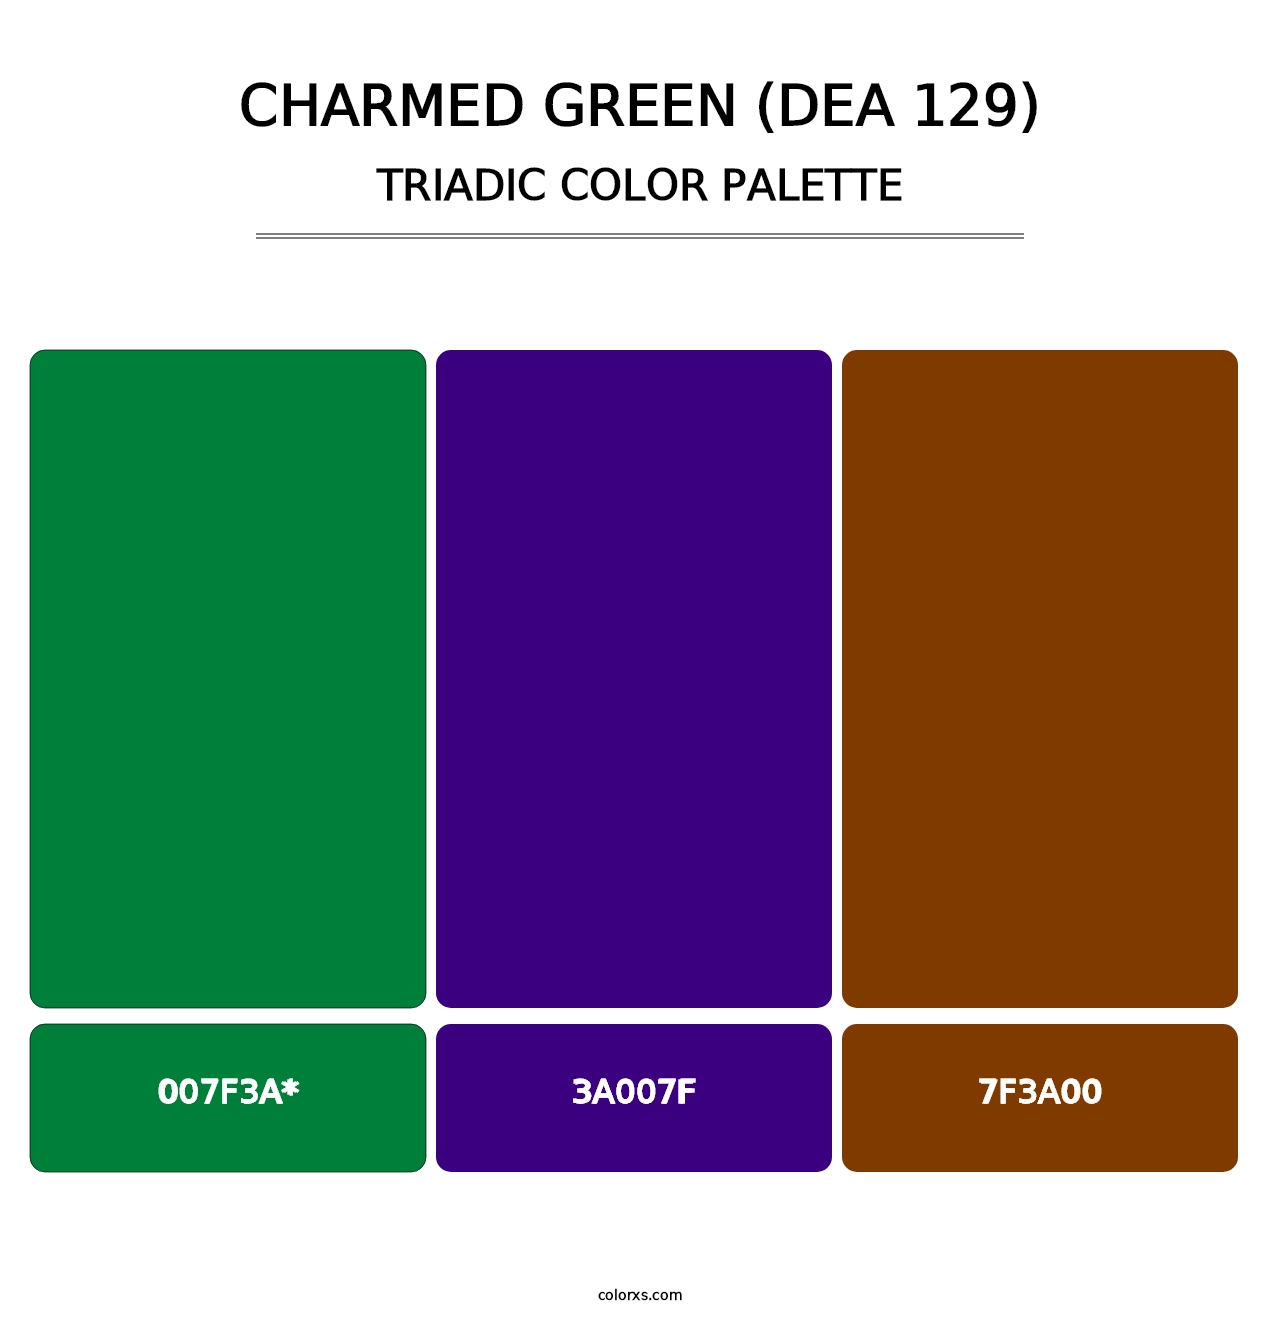 Charmed Green (DEA 129) - Triadic Color Palette